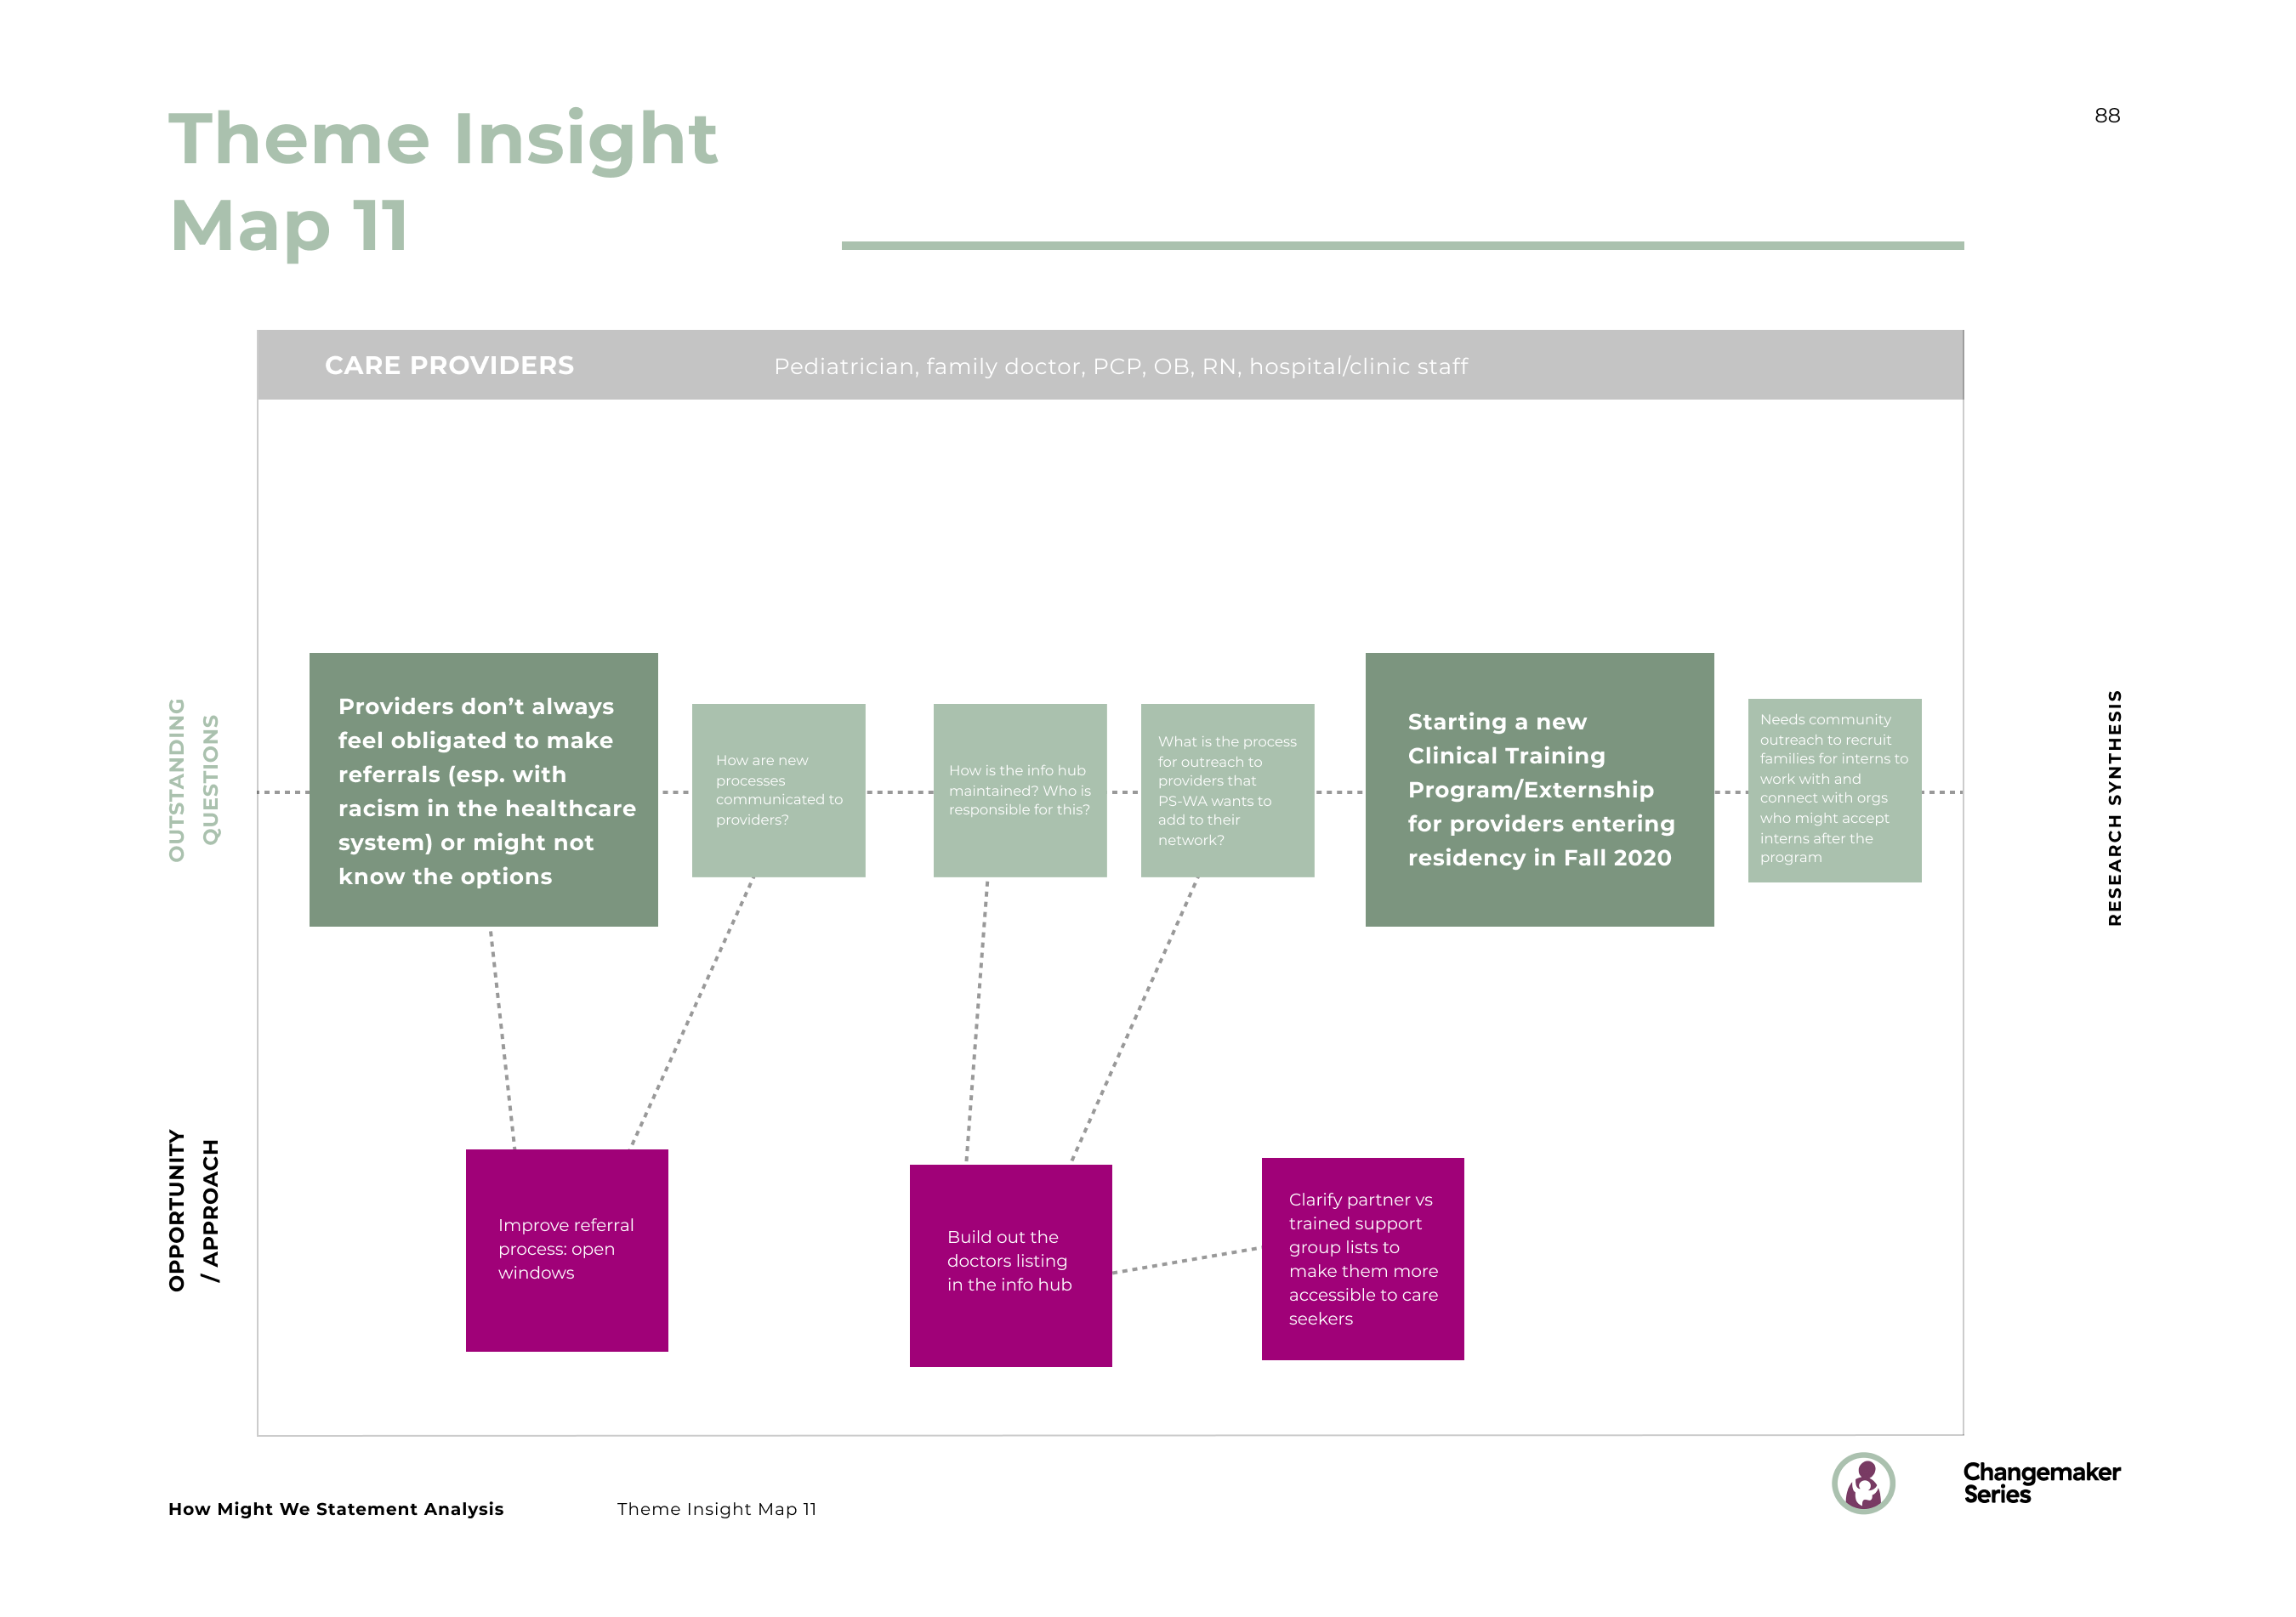 88_How Might We Statement Analysis_Theme Insight Map 12_2